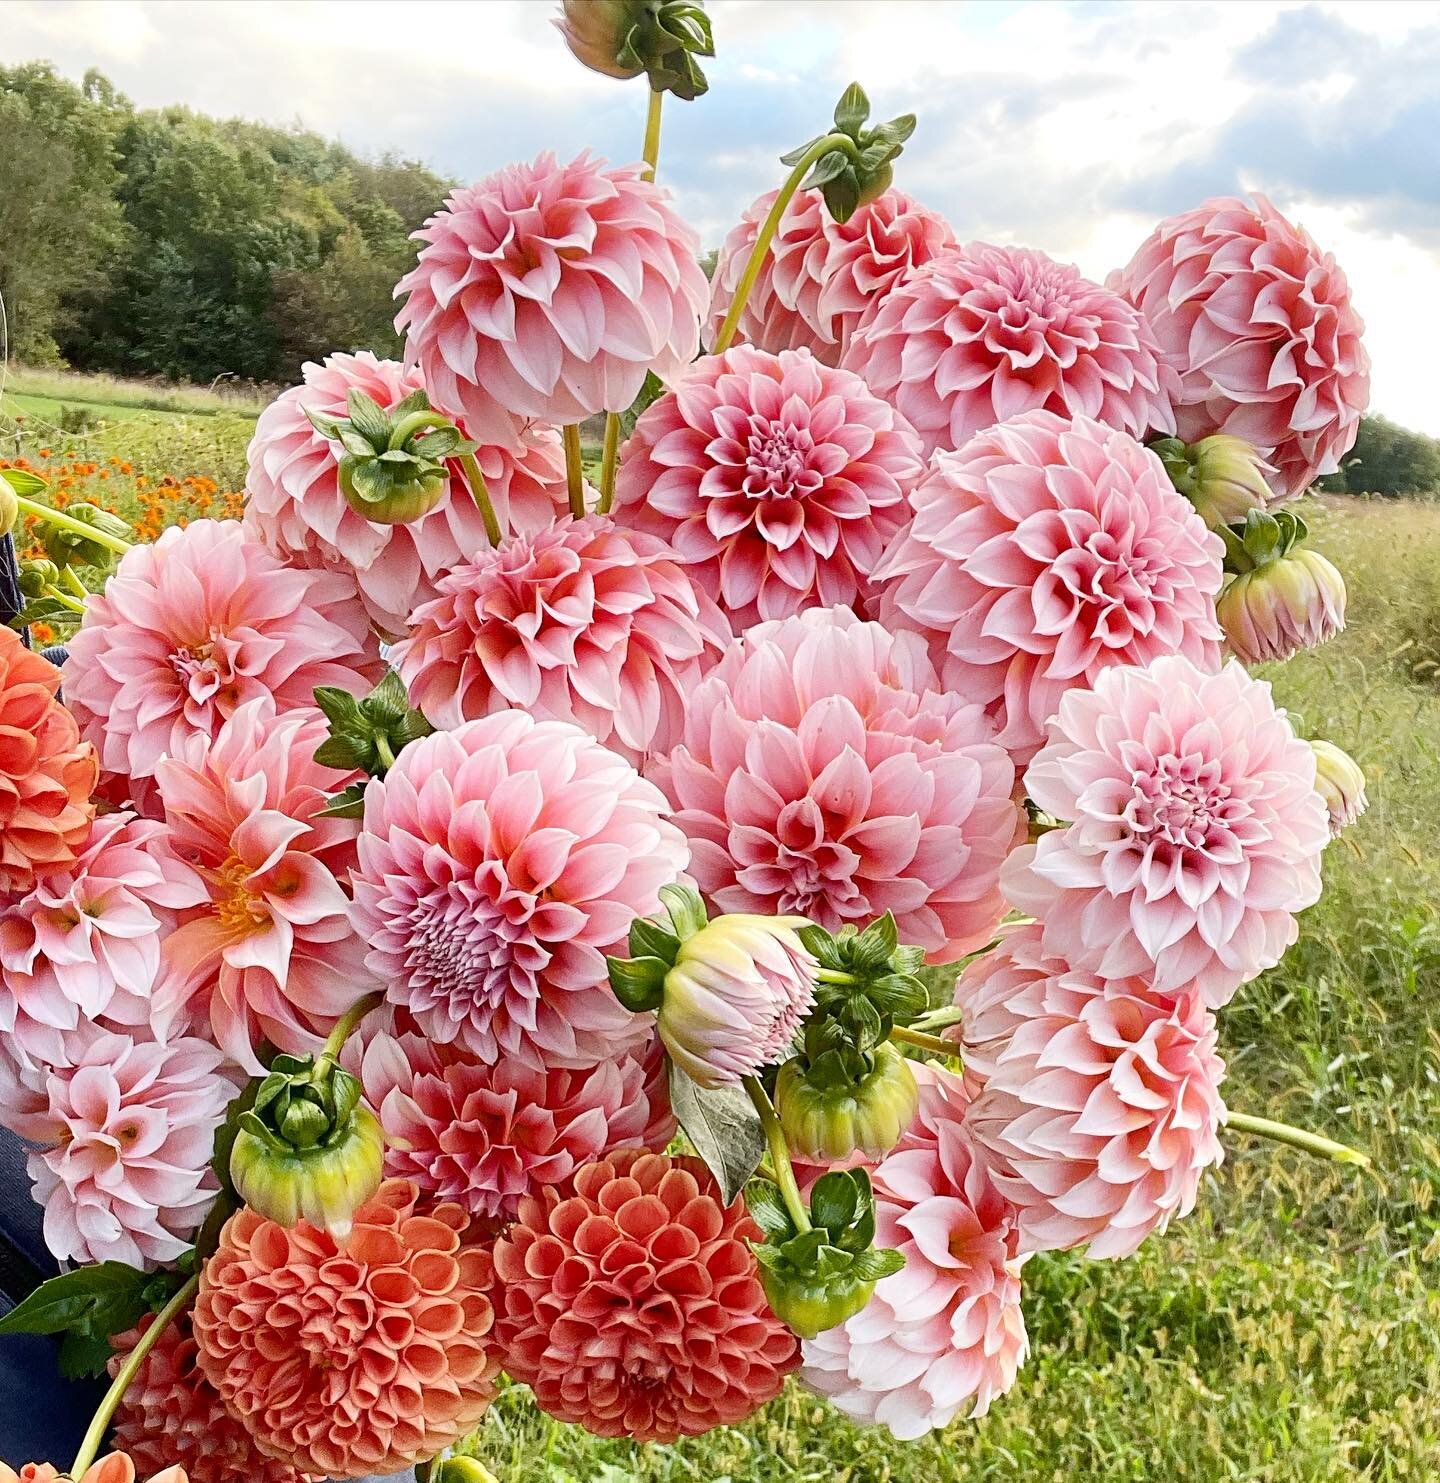 Happy Monday! Every year more and more dahlia varieties are bred, each seemingly more beautiful than the last. There is such a thing as dahlia mania as growers and gardeners scramble to purchase tubers and cuttings of the latest and greatest. This ga